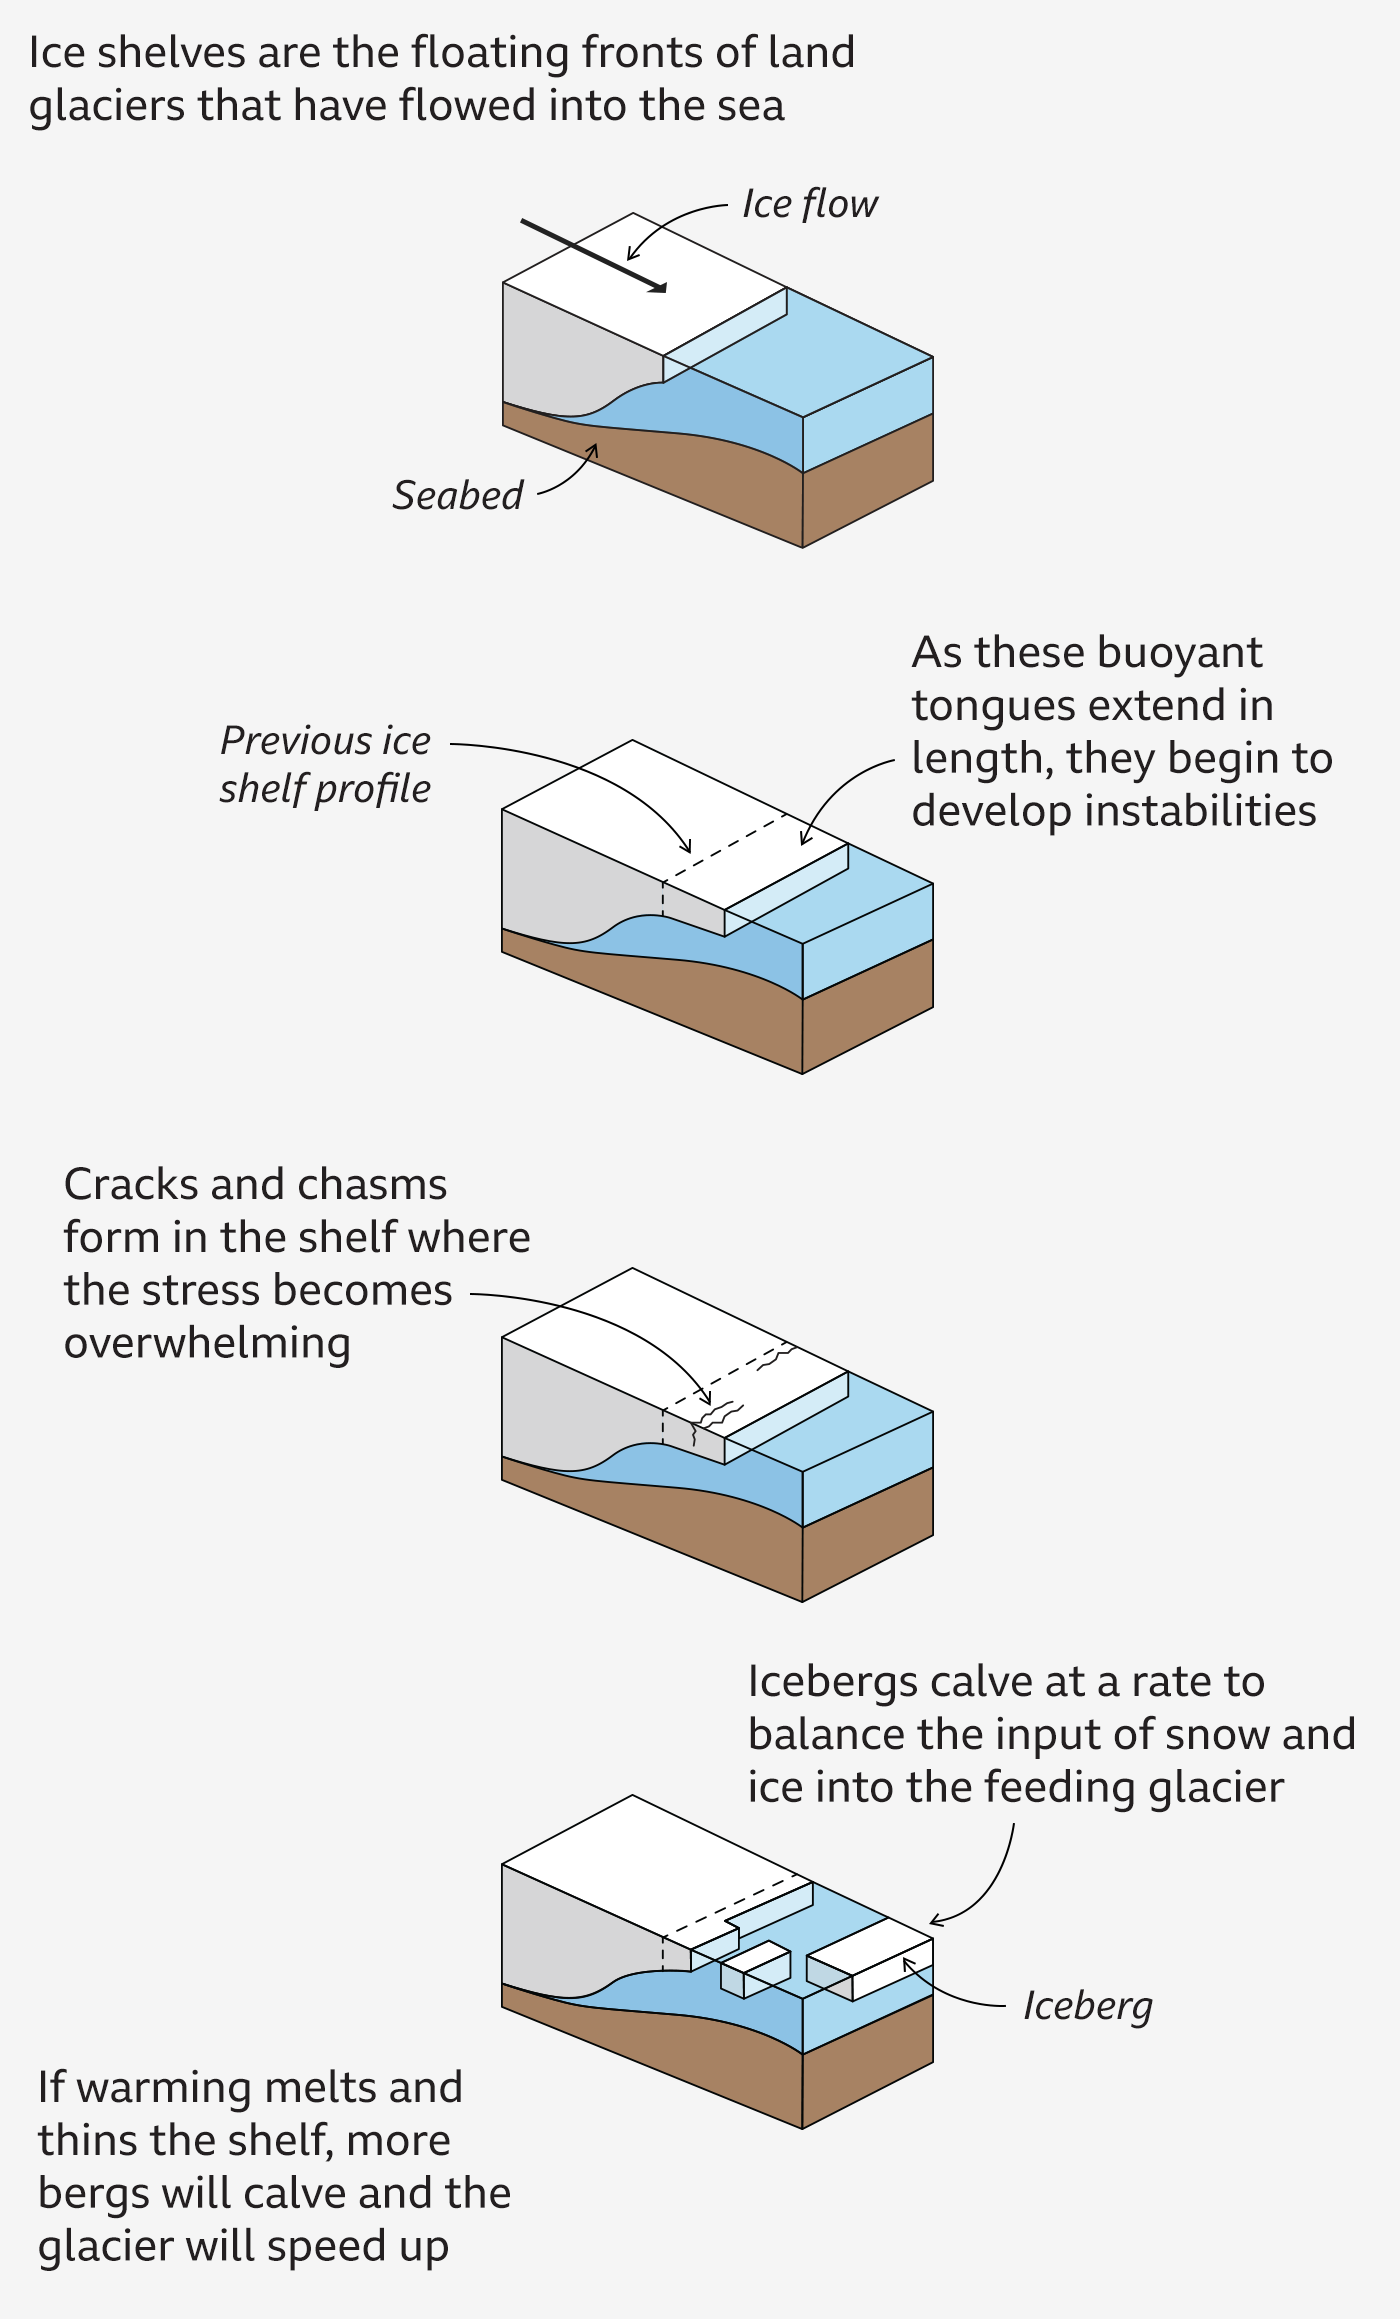 A graphic explaining the process that creates giant icebergs. They are formed when large parts of ice shelves break off